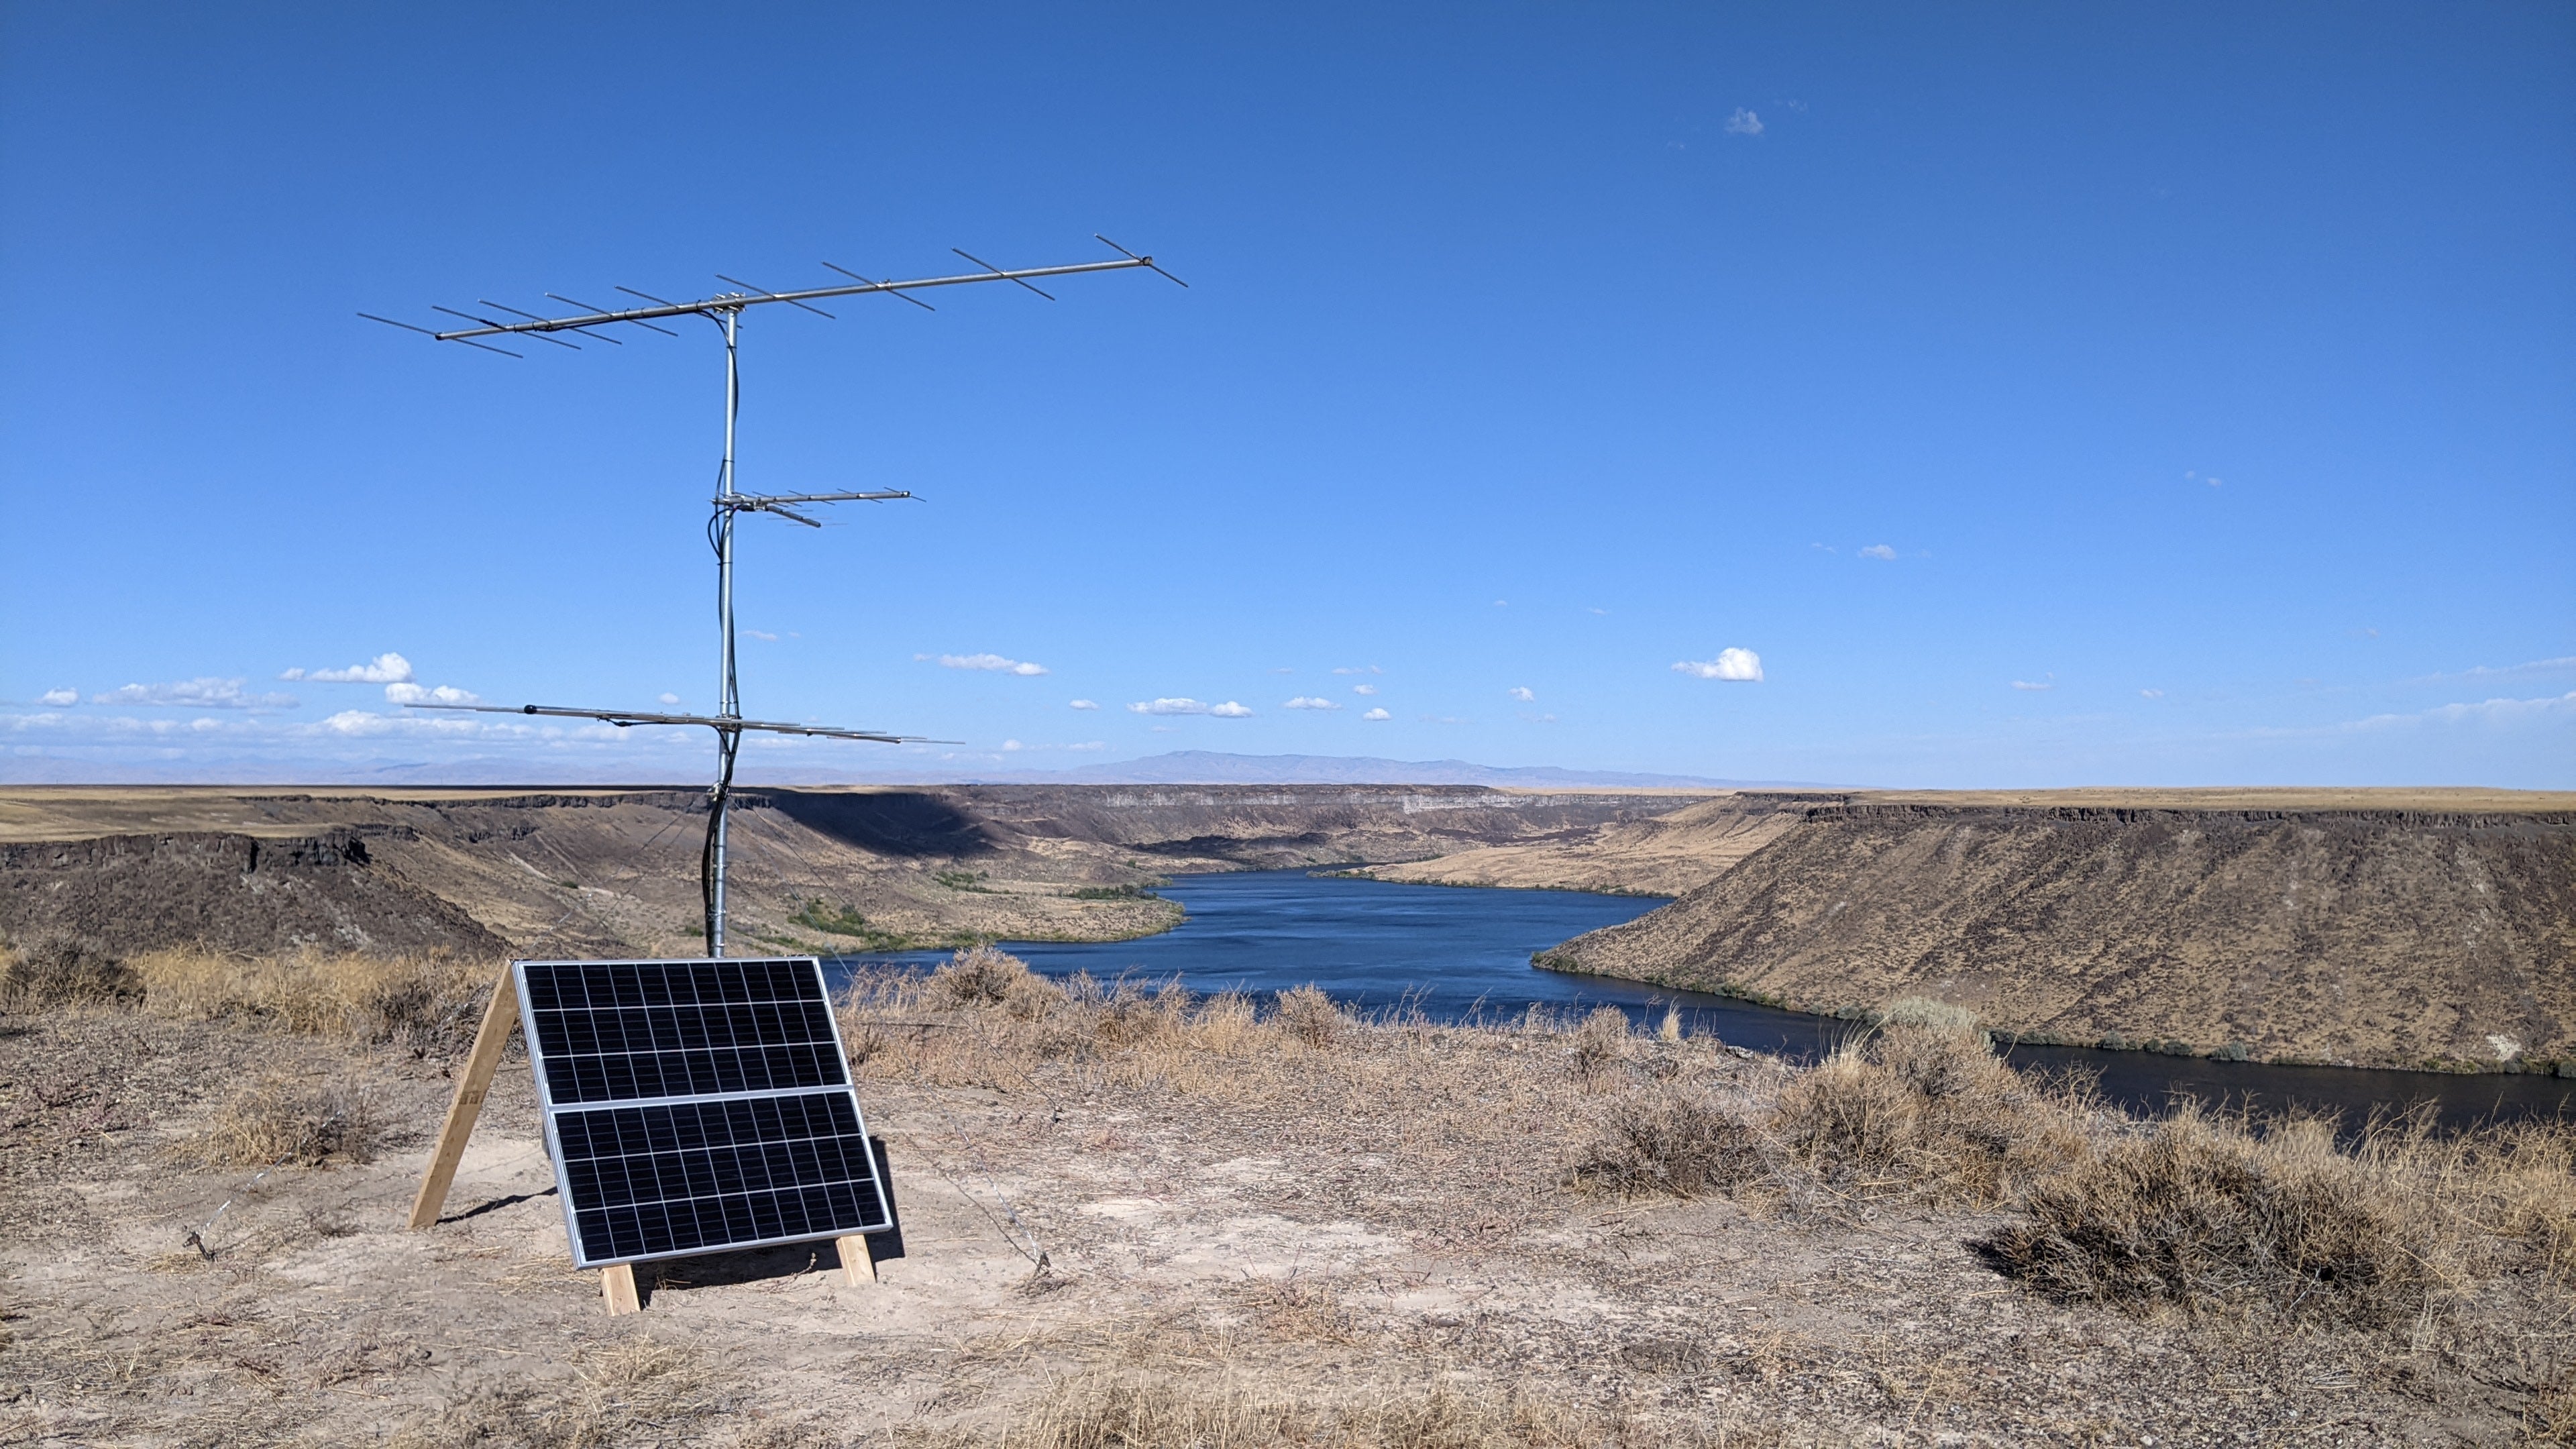 a solar panel and large antenna stand in the foreground. Behind you can see CJ Strike reservoir